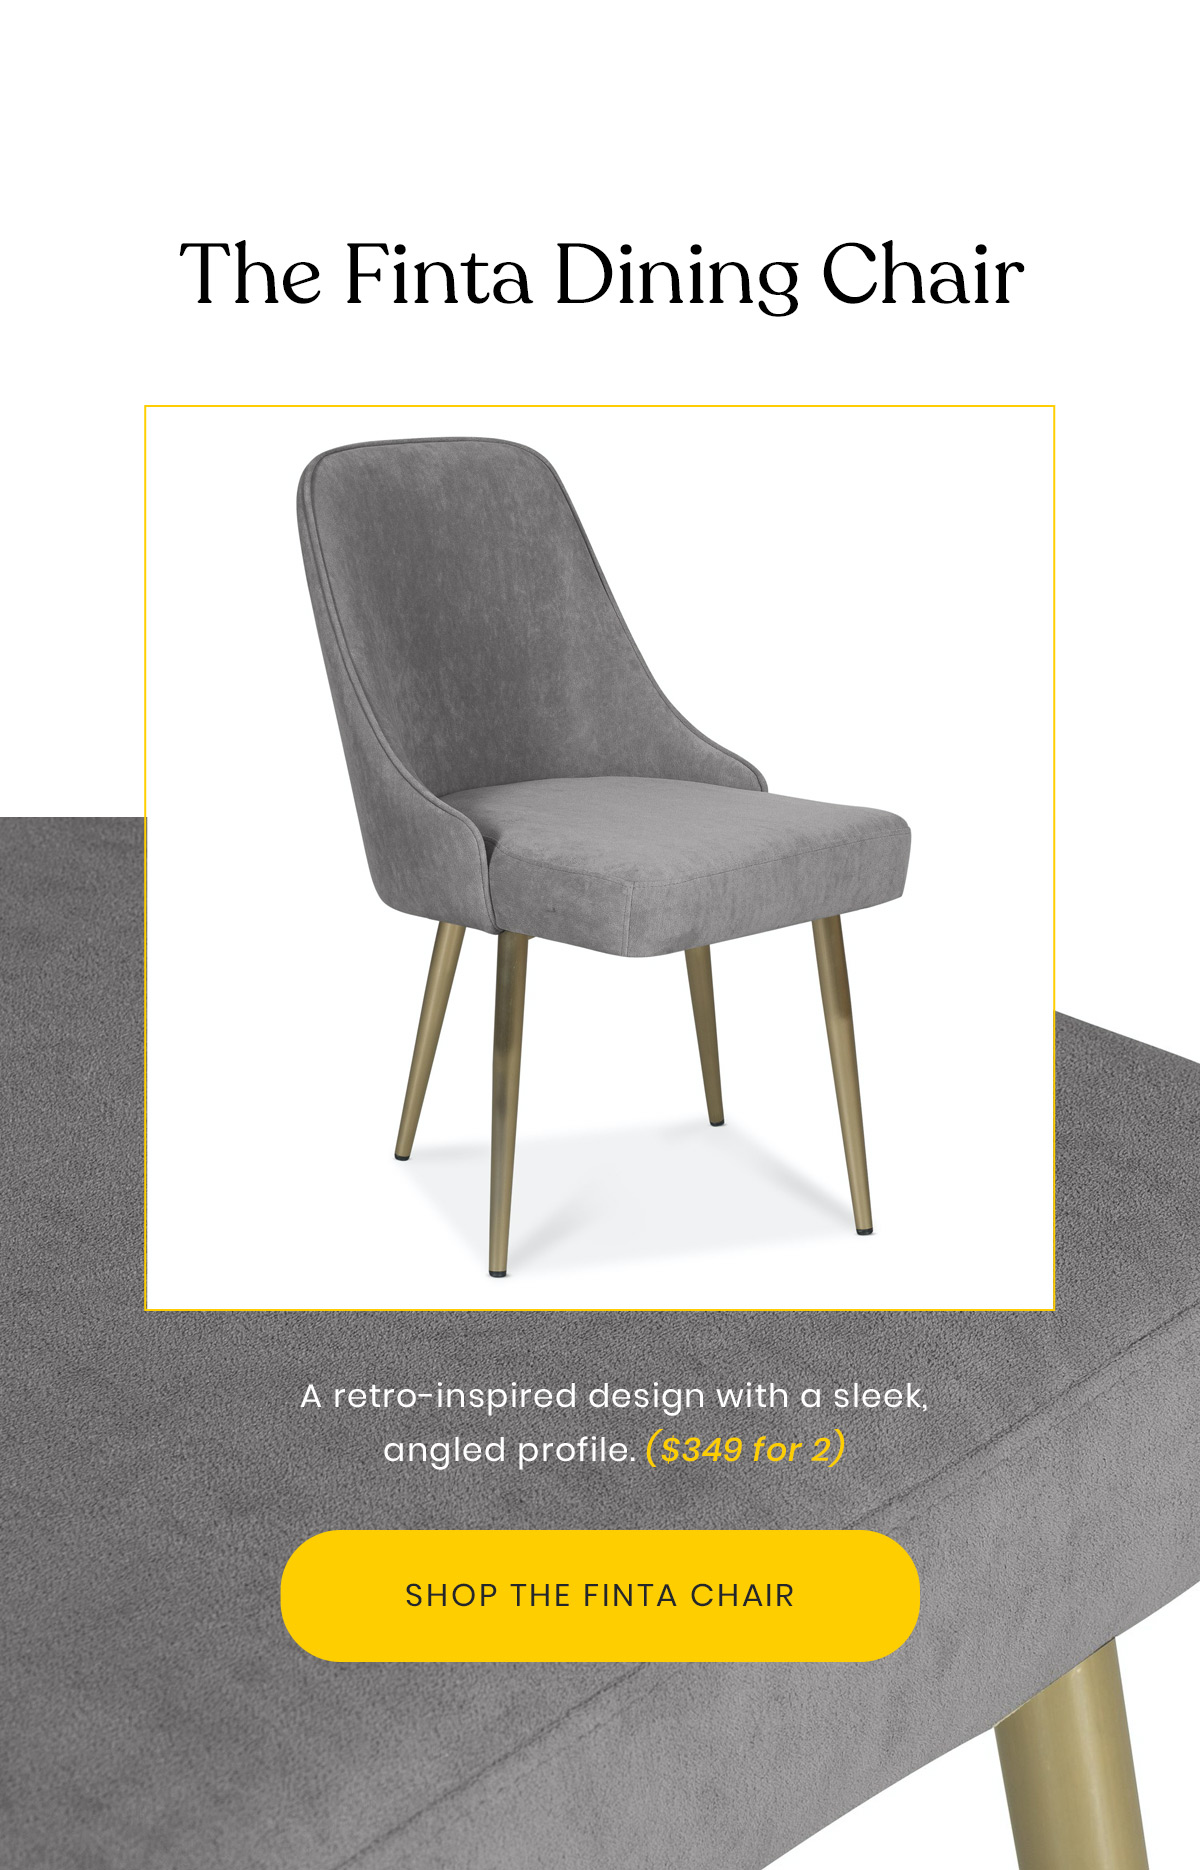 The Finta Dining Chair | A retro-inspired design with a sleek, angled profile. ($349 for 2)